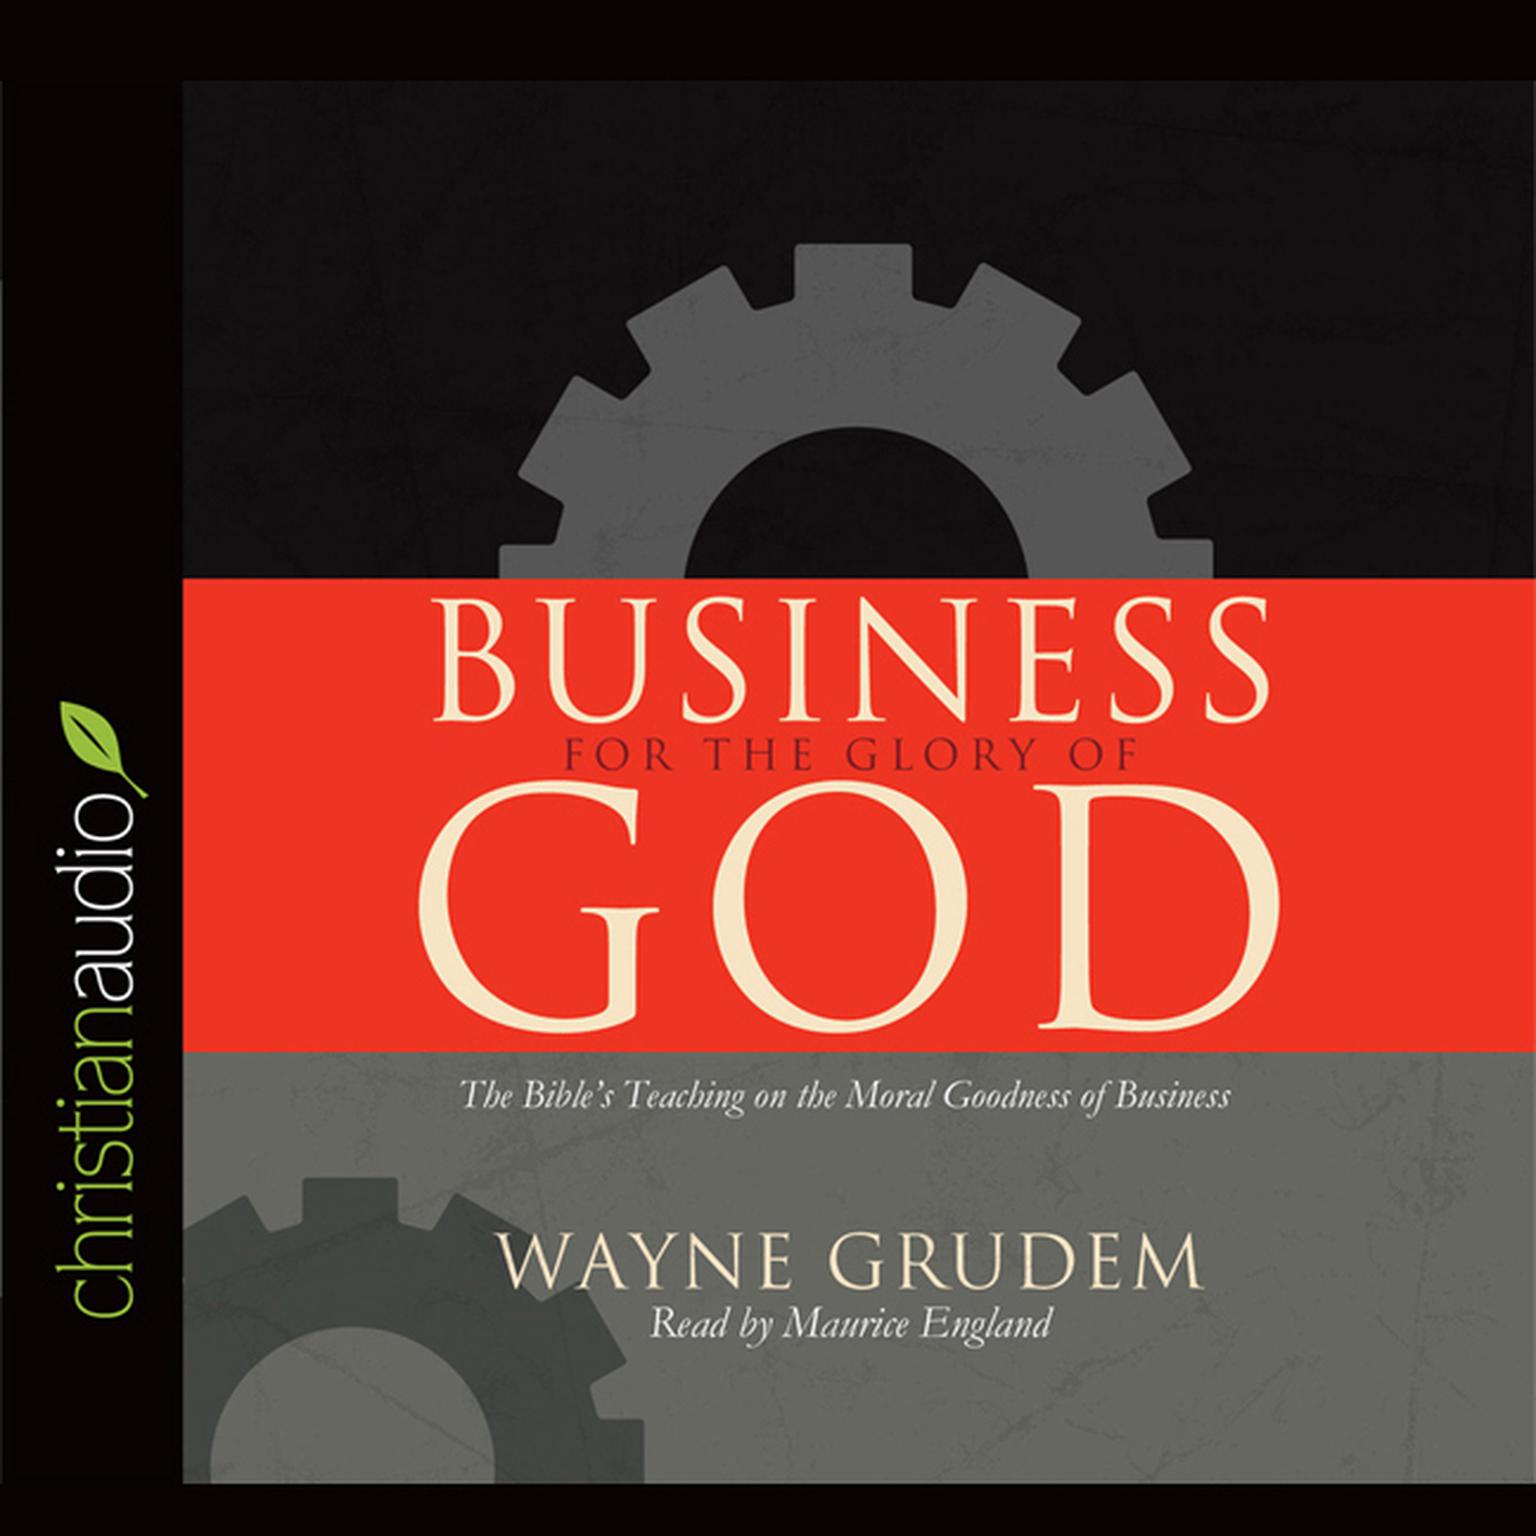 Business for the Glory of God: The Bibles Teaching on the Moral Goodness of Business Audiobook, by Wayne Grudem